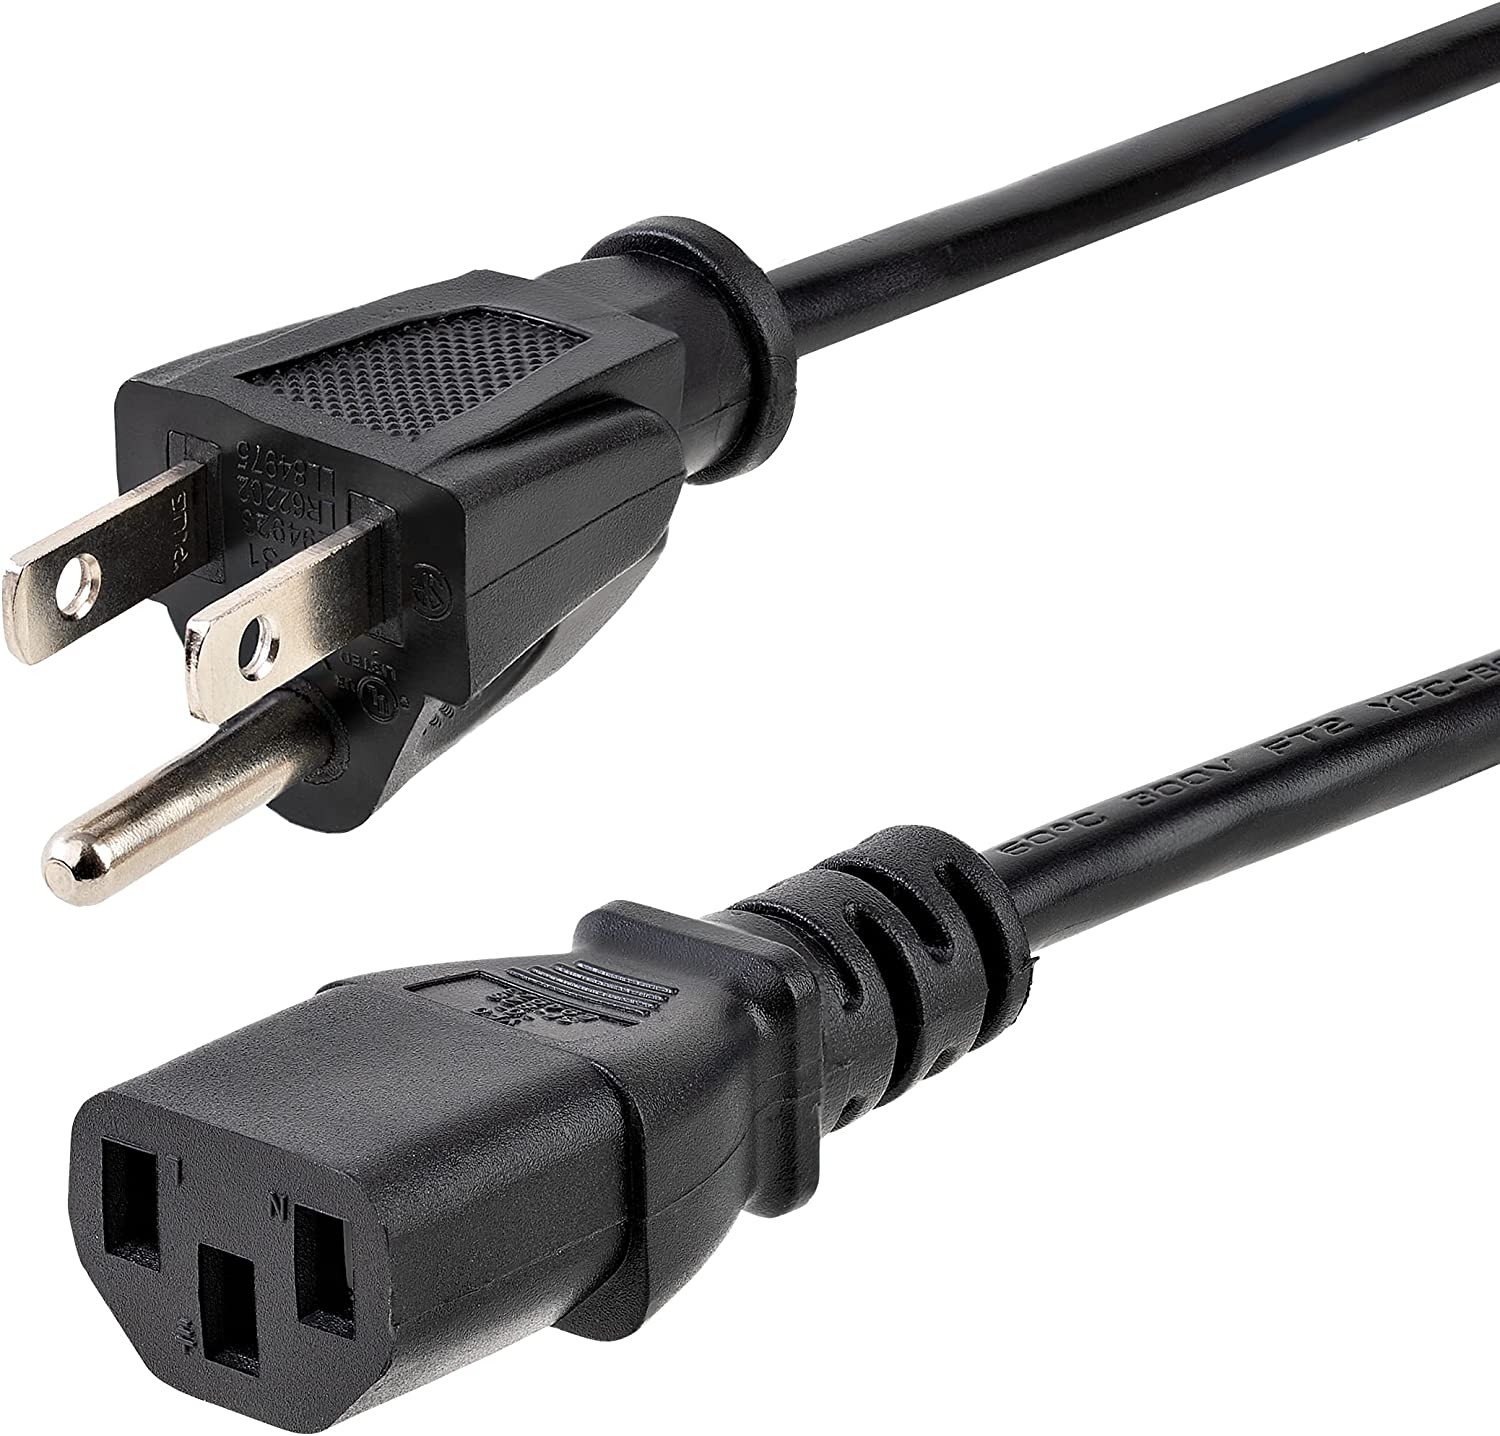 Star Tech.Com 1ft (30m) Computer Power Cord, Nema 5 15 P To C13, 10 A 125 V, 18 Awg, Black Replacement Ac Power Cord, Printer Power Cord, Pc Power Supply Cable, Monitor Power Cable   Ul Listed (Pxt1011)